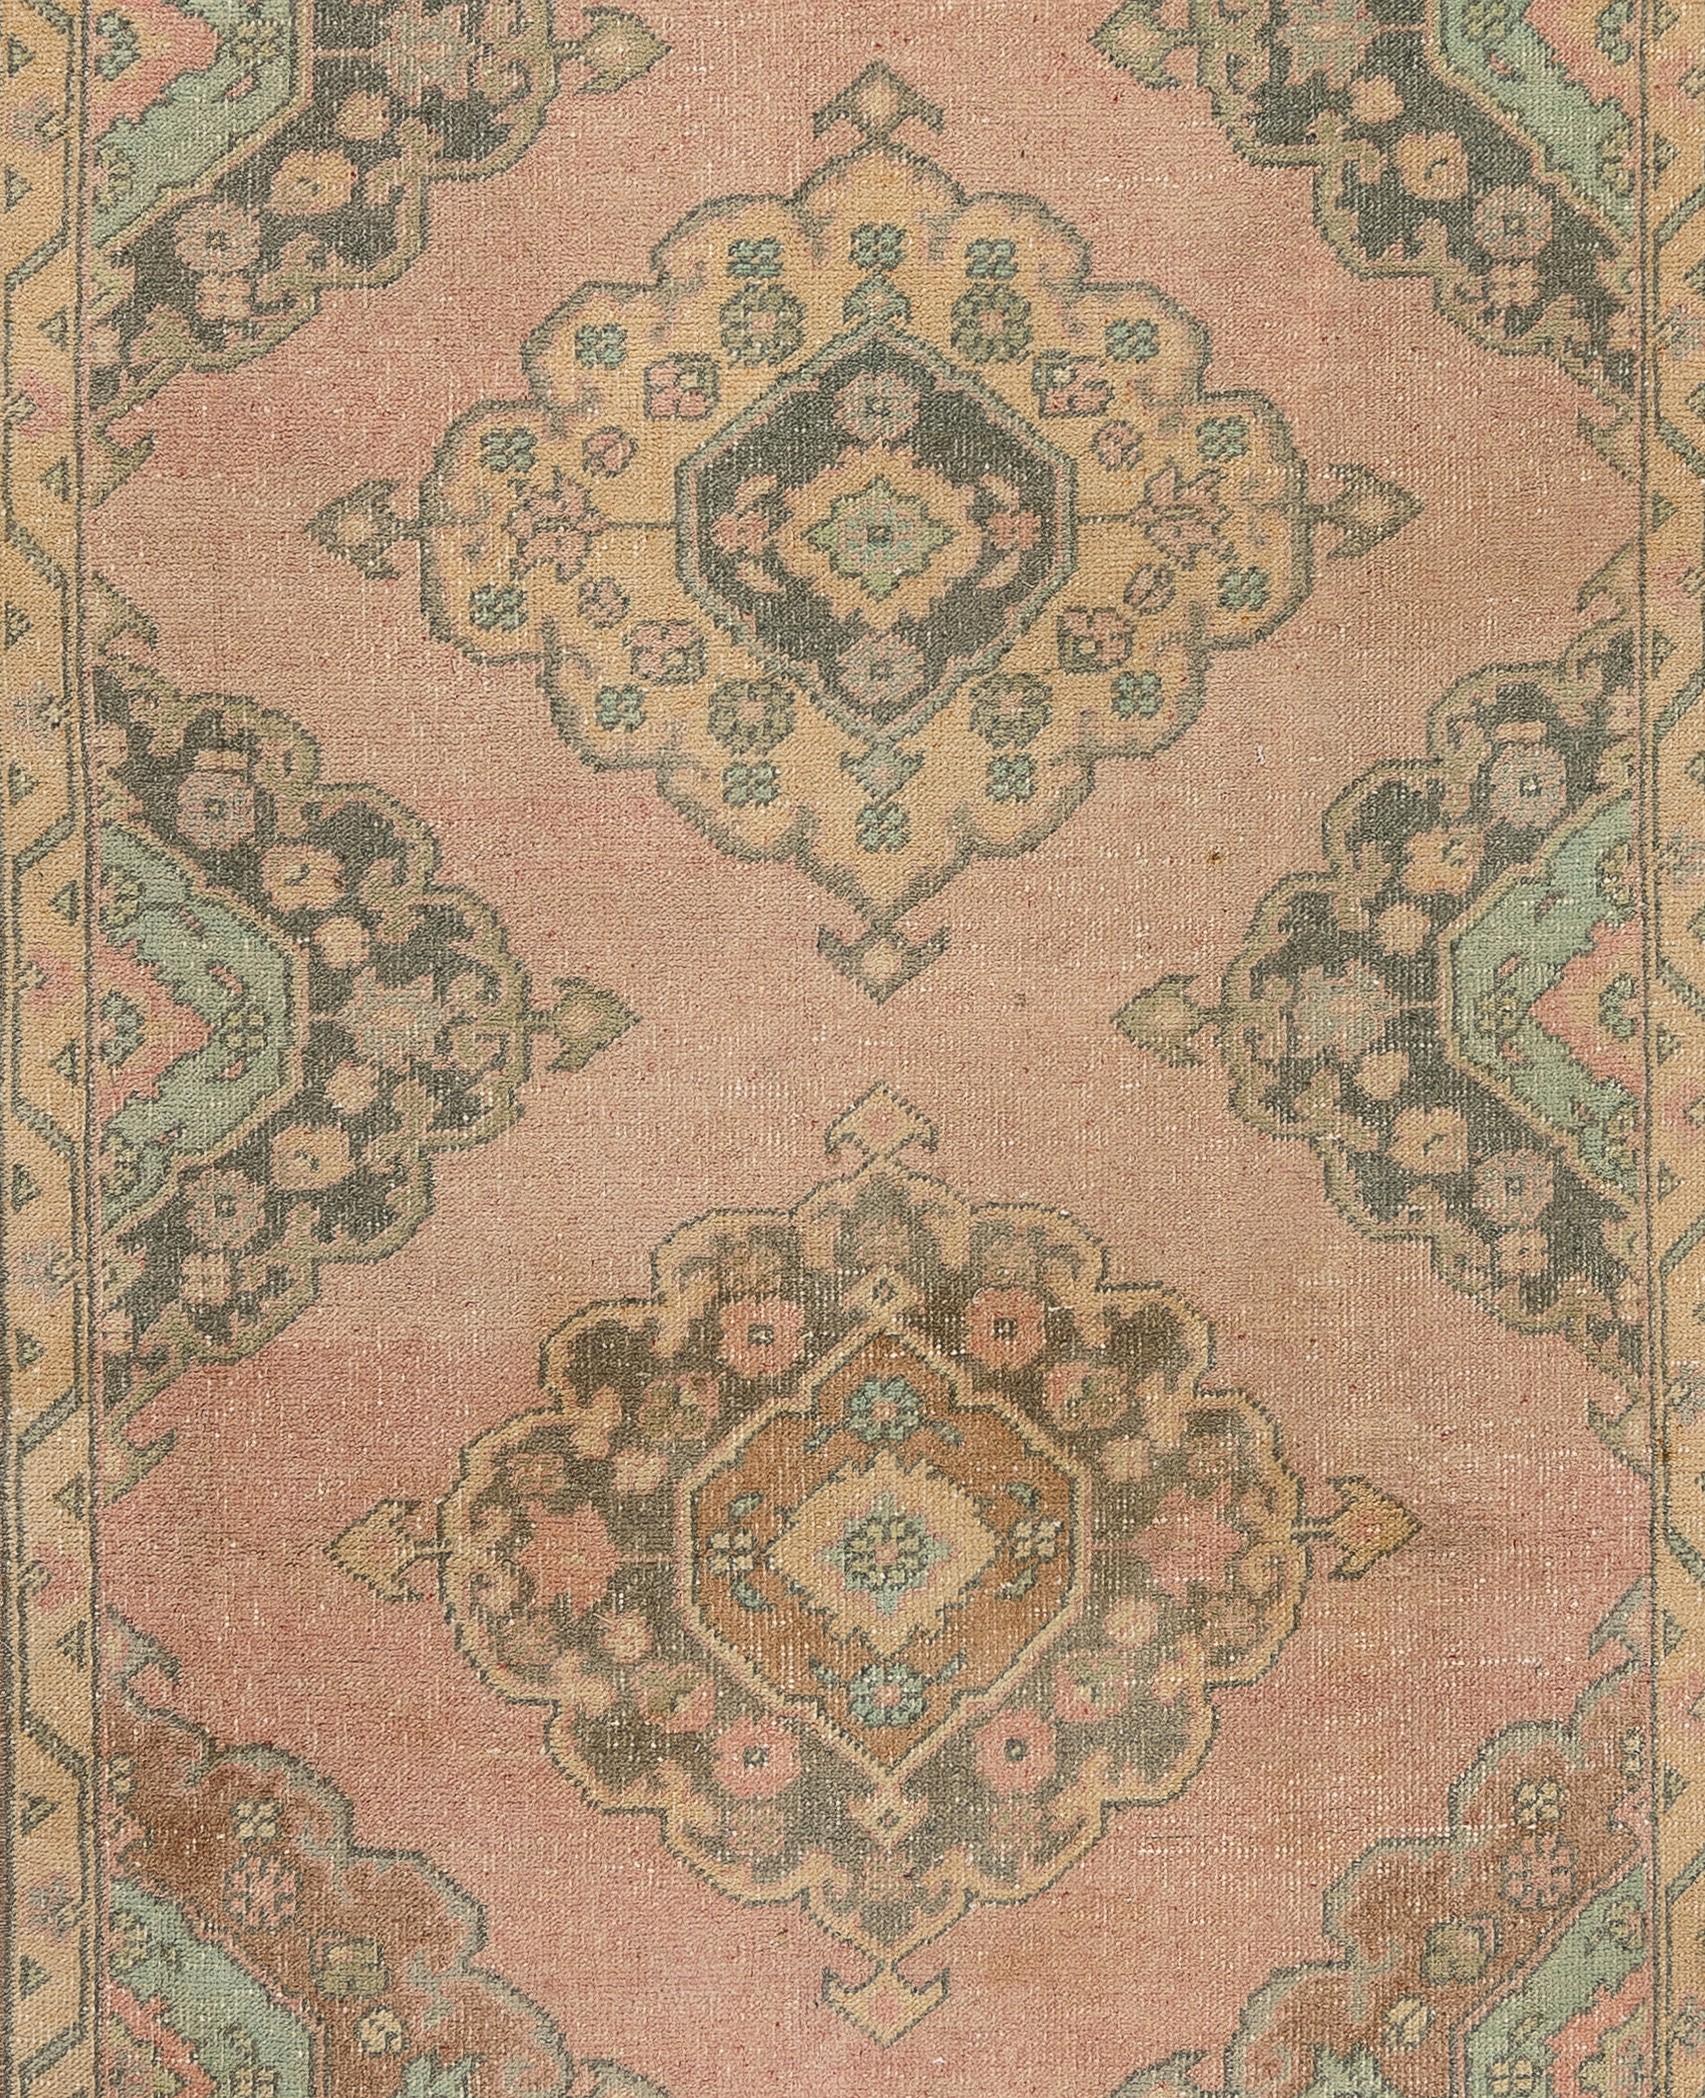 3.7x11.2 Ft Hand-Knotted Vintage Turkish Runner Rug in Faded Coral & Light Blue In Good Condition For Sale In Philadelphia, PA